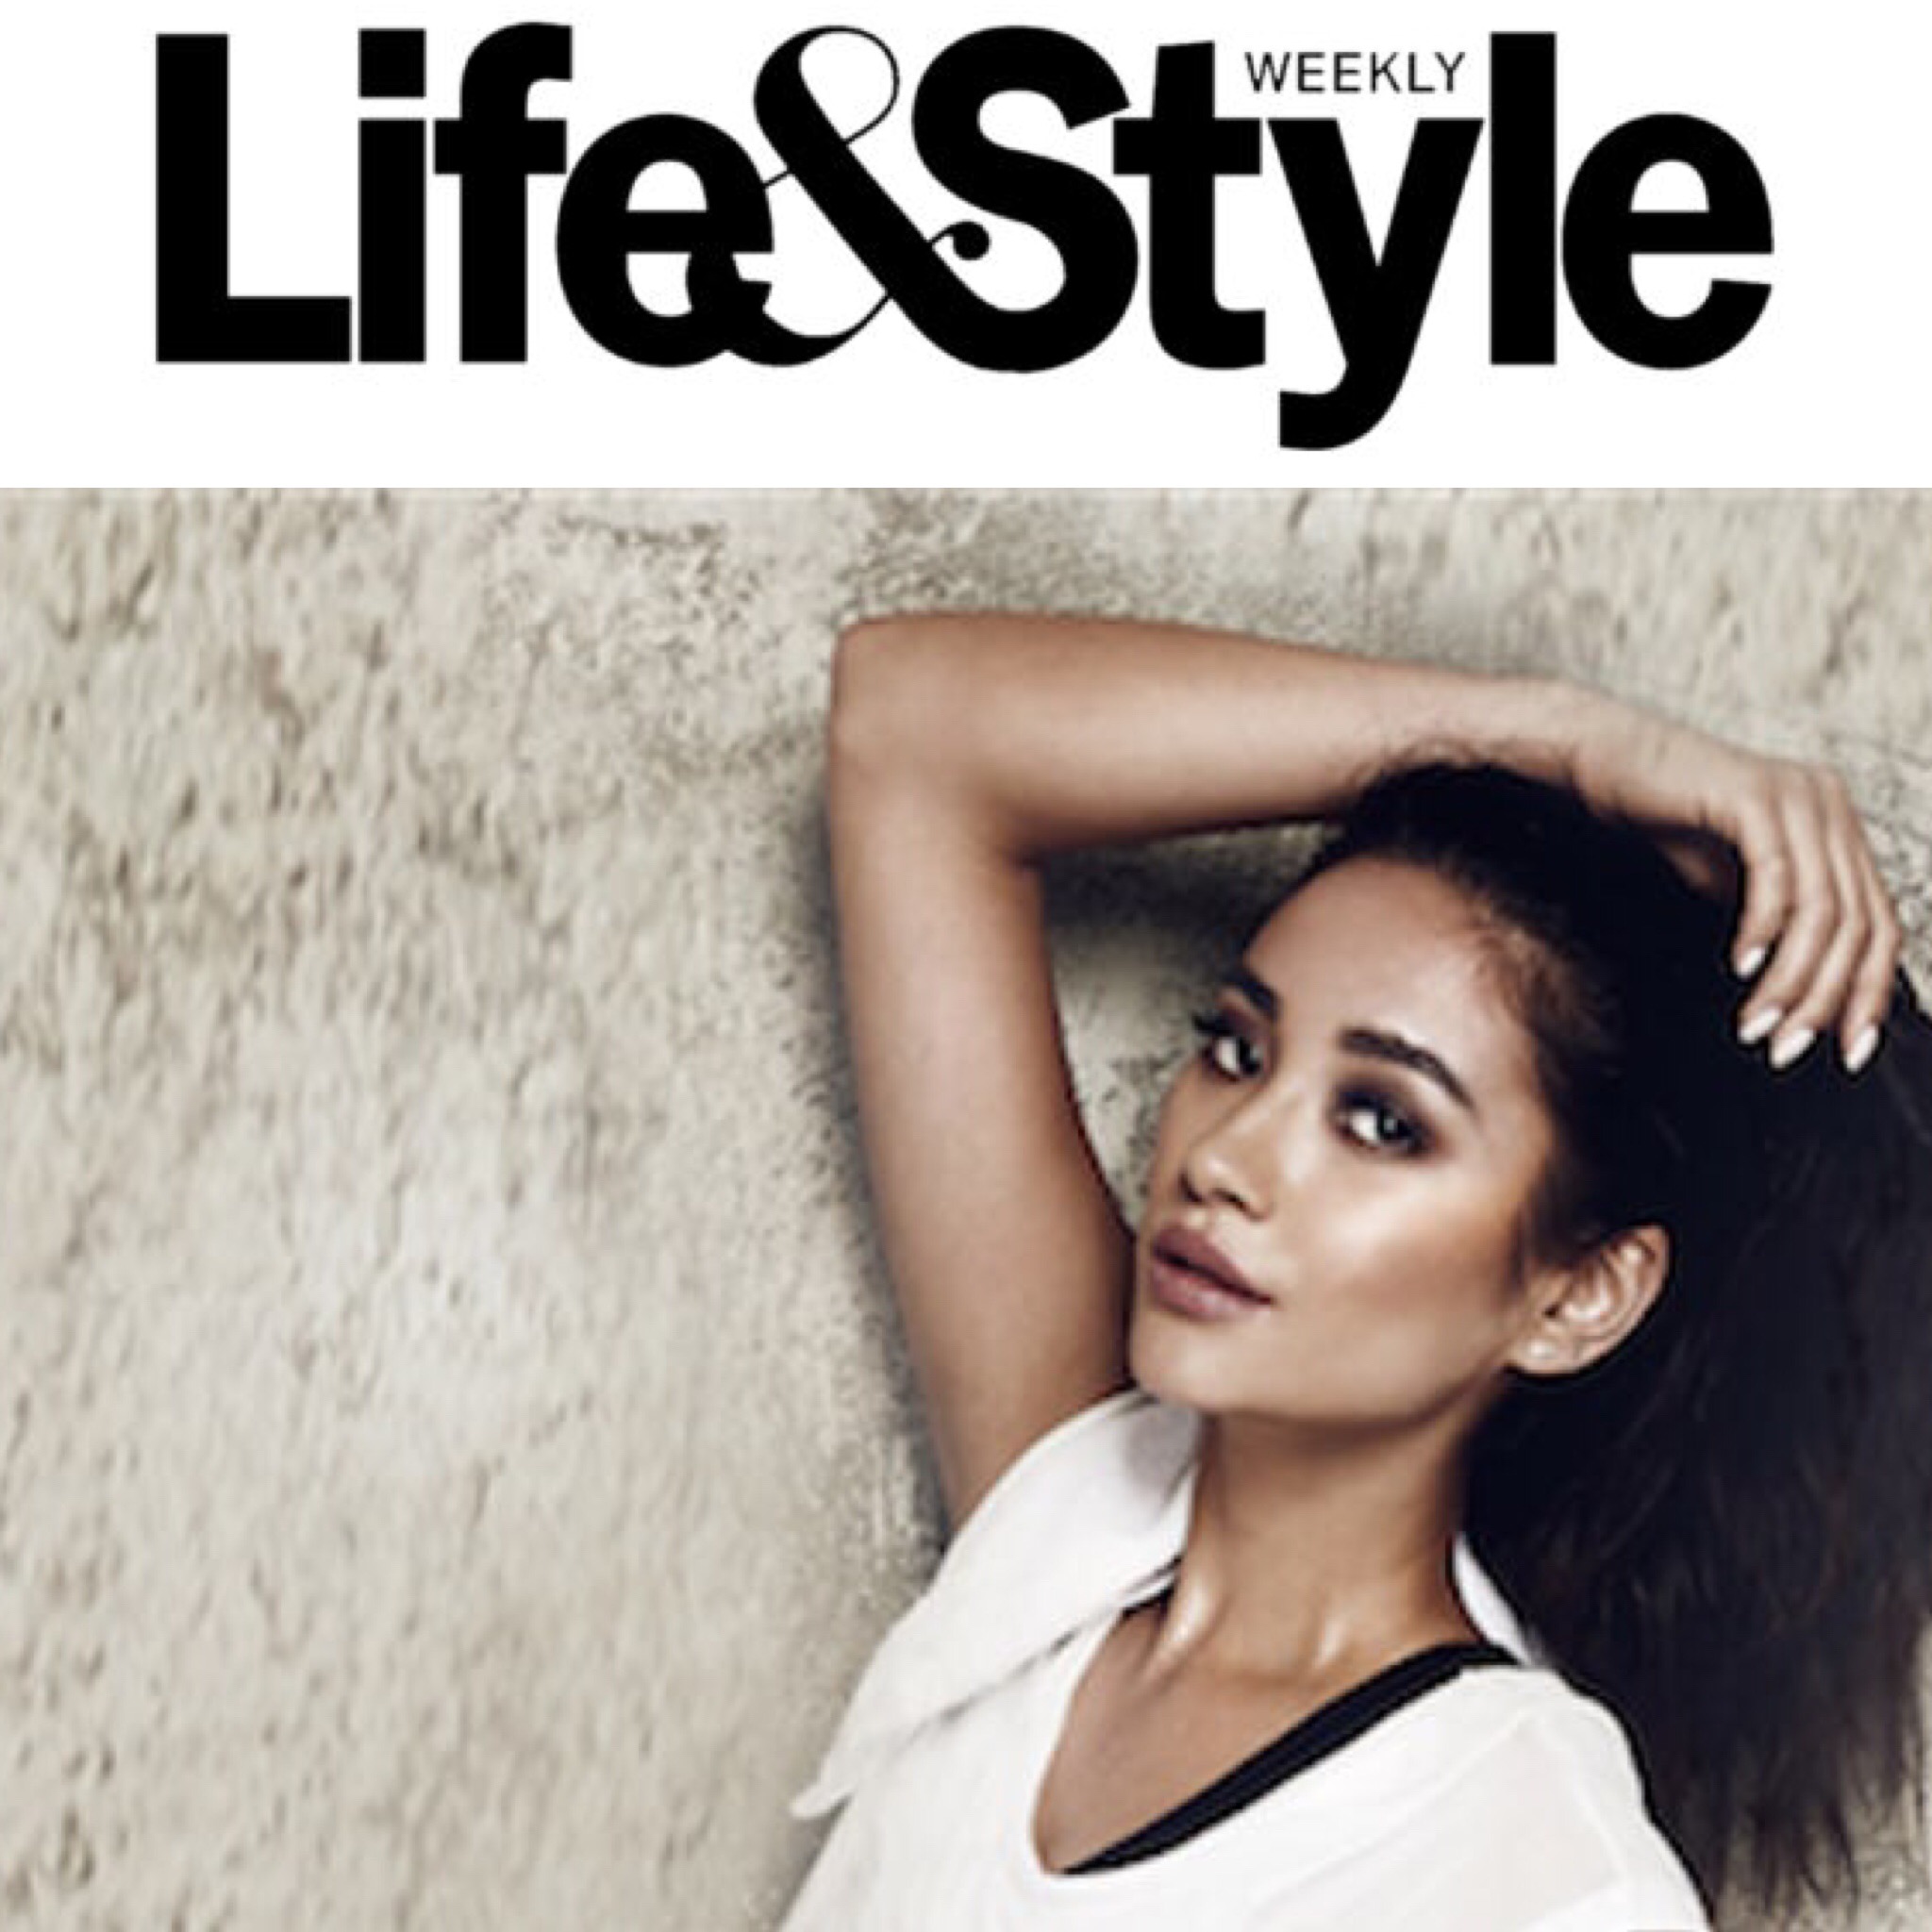  http://www.lifeandstylemag.com/posts/pretty-little-liars-star-shay-mitchell-reveals-the-inspiration-behind-her-new-line-with-kohl-s-66778 